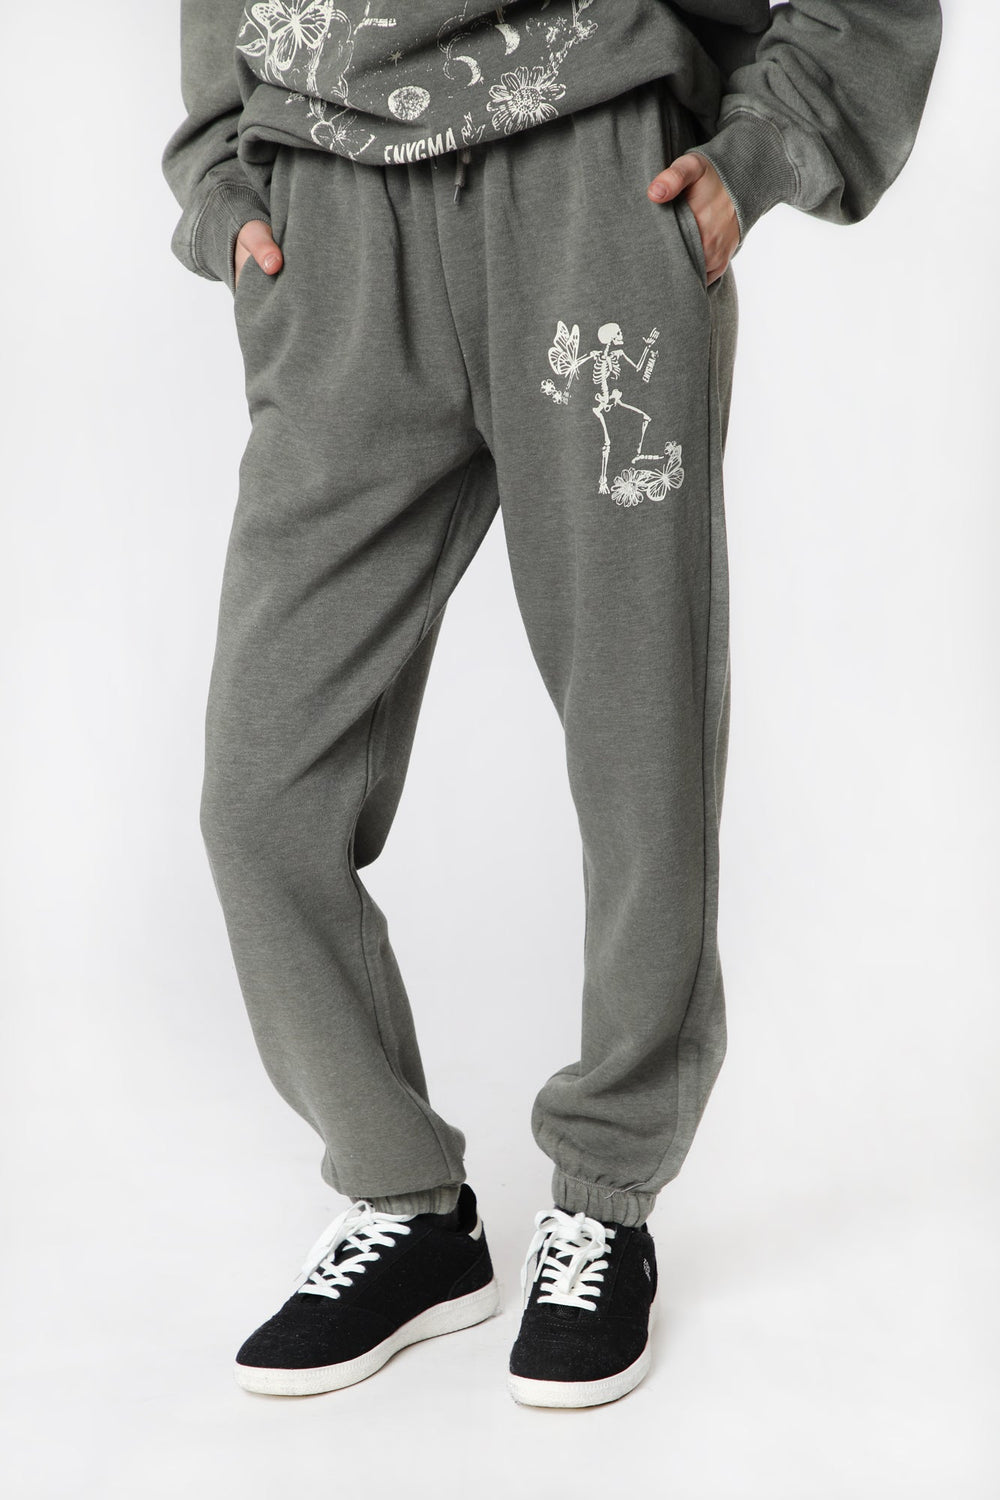 Womens Enygma Graphic Sweatpant Womens Enygma Graphic Sweatpant